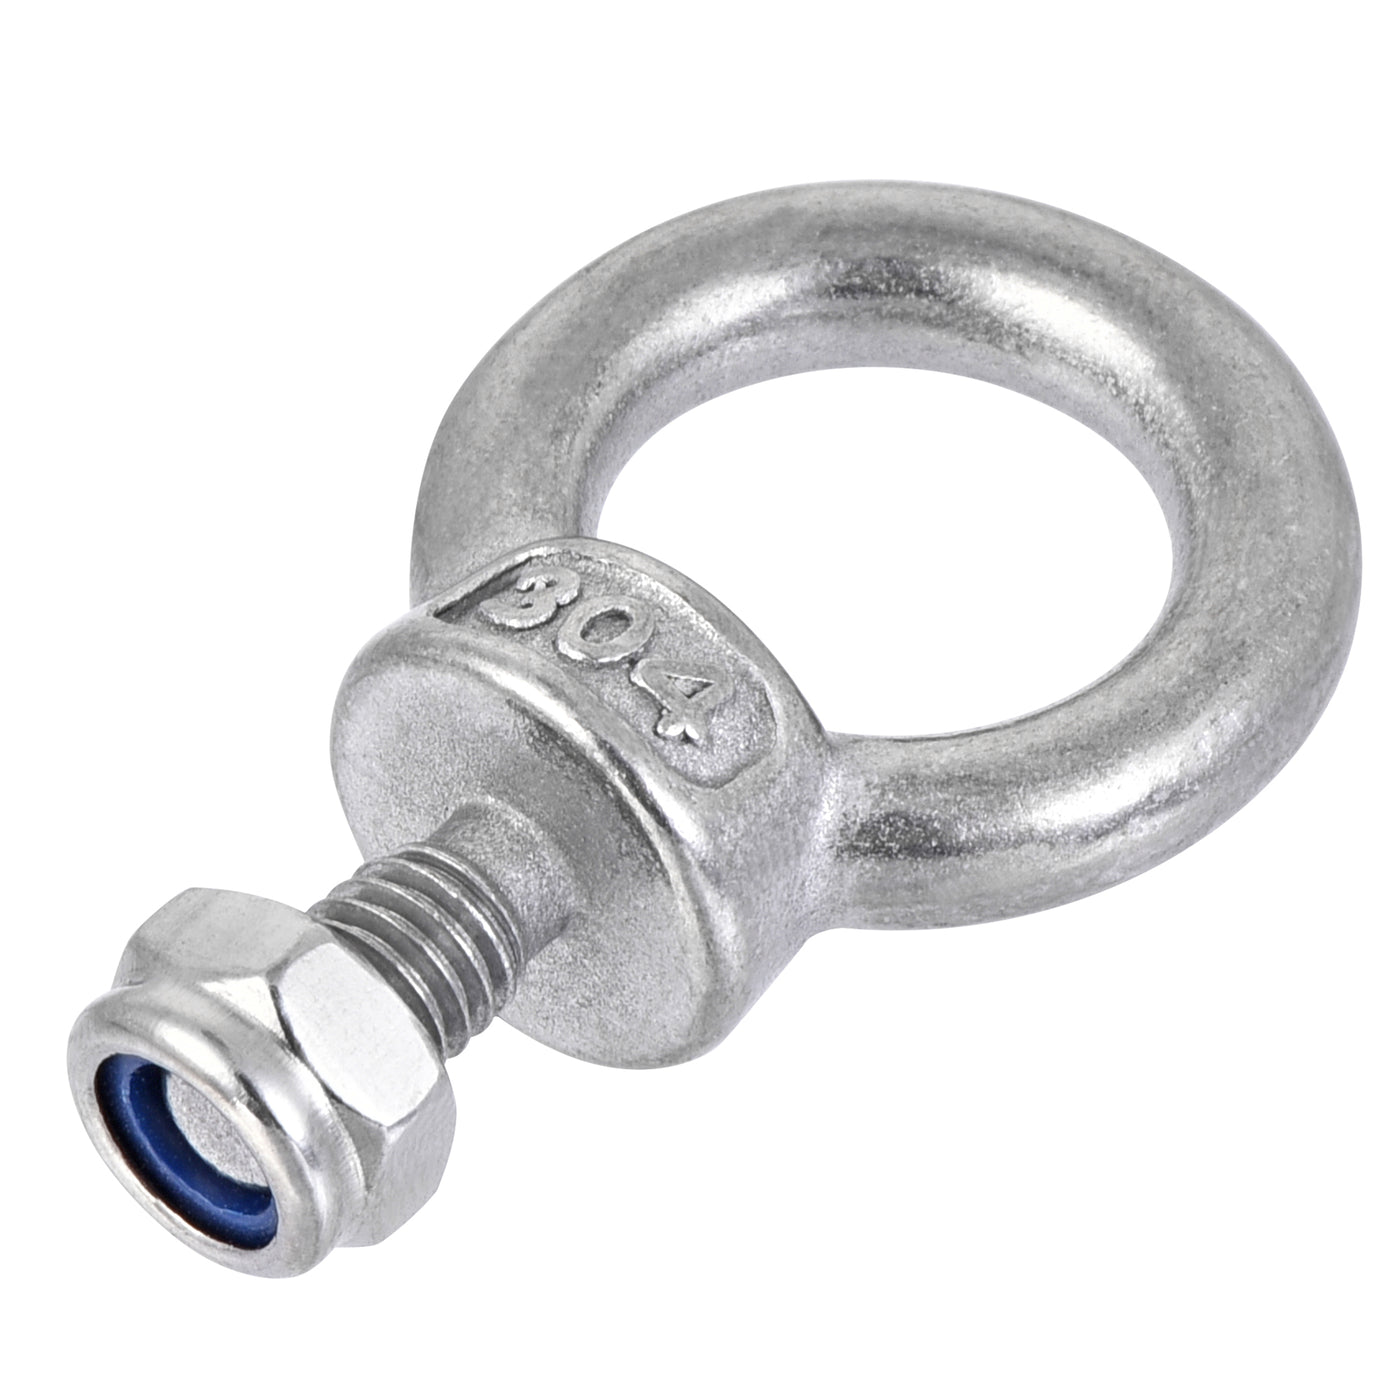 uxcell Uxcell Lifting Eye Bolt M6 x 12mm Male Thread with Hex Screw Nut for Hanging, 304 Stainless Steel, 4 Sets